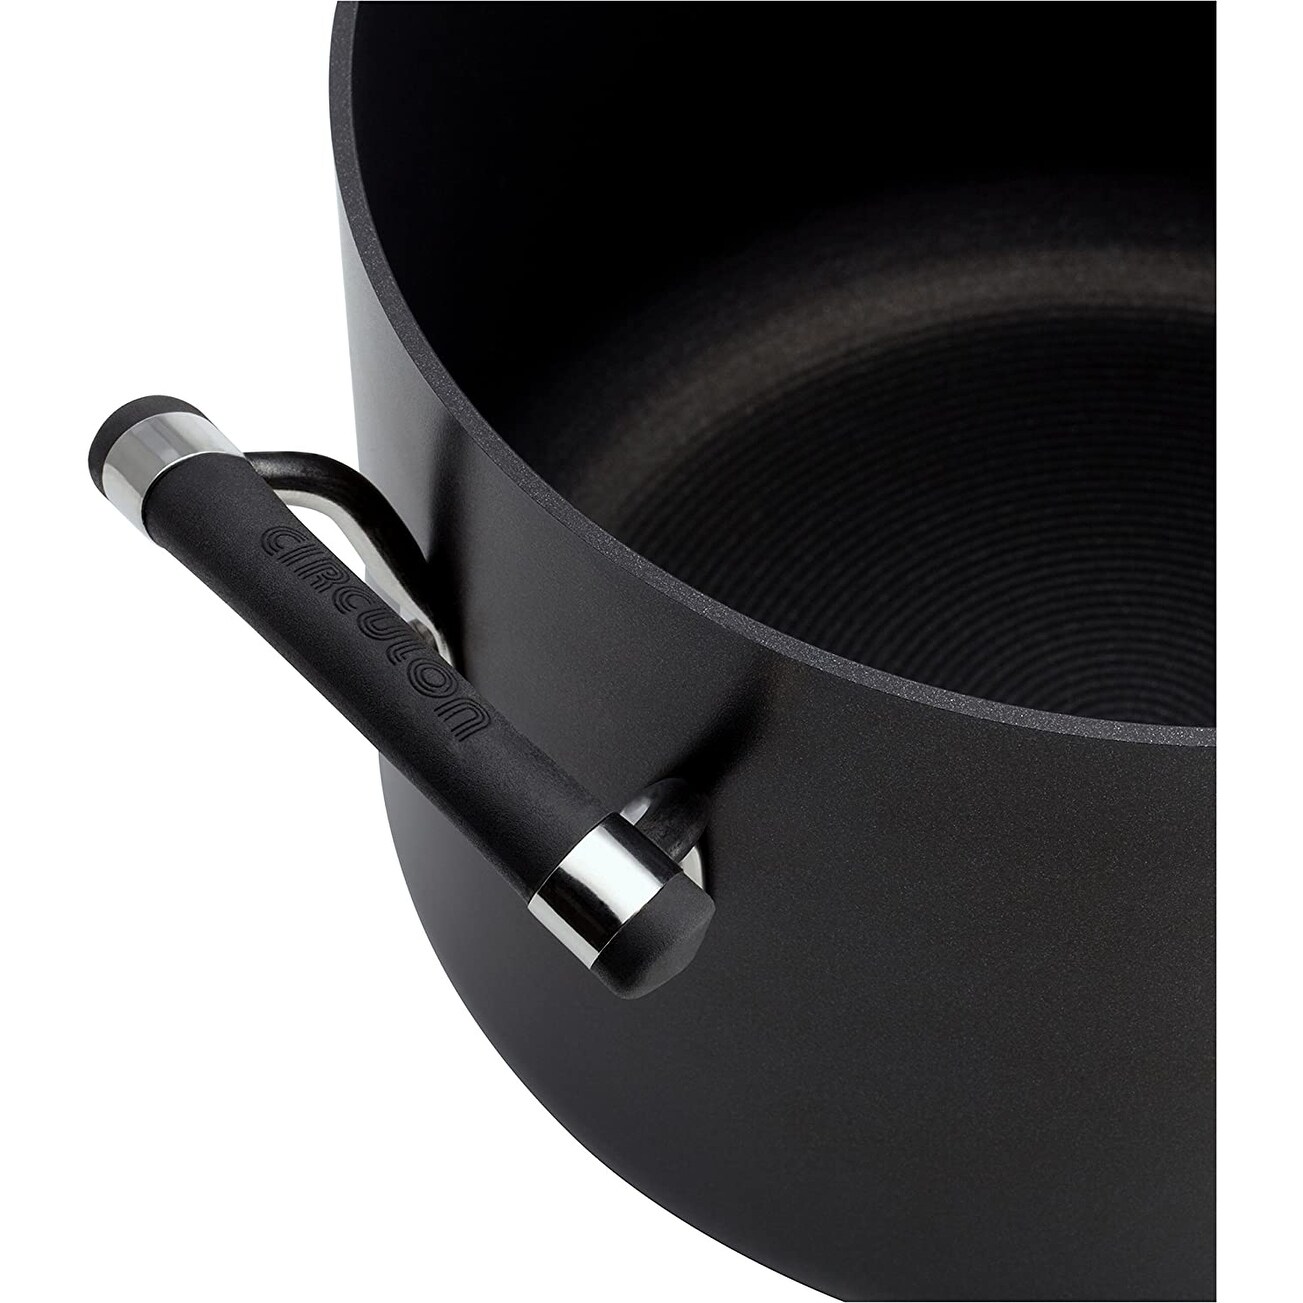 https://ak1.ostkcdn.com/images/products/is/images/direct/1442ece111e6103133c6f09a8760b51975100039/Circulon-Acclaim-Hard-Anodized-Nonstick-Cookware-Pots-and-Pans-Set%2C-13-Piece%2C-Black.jpg